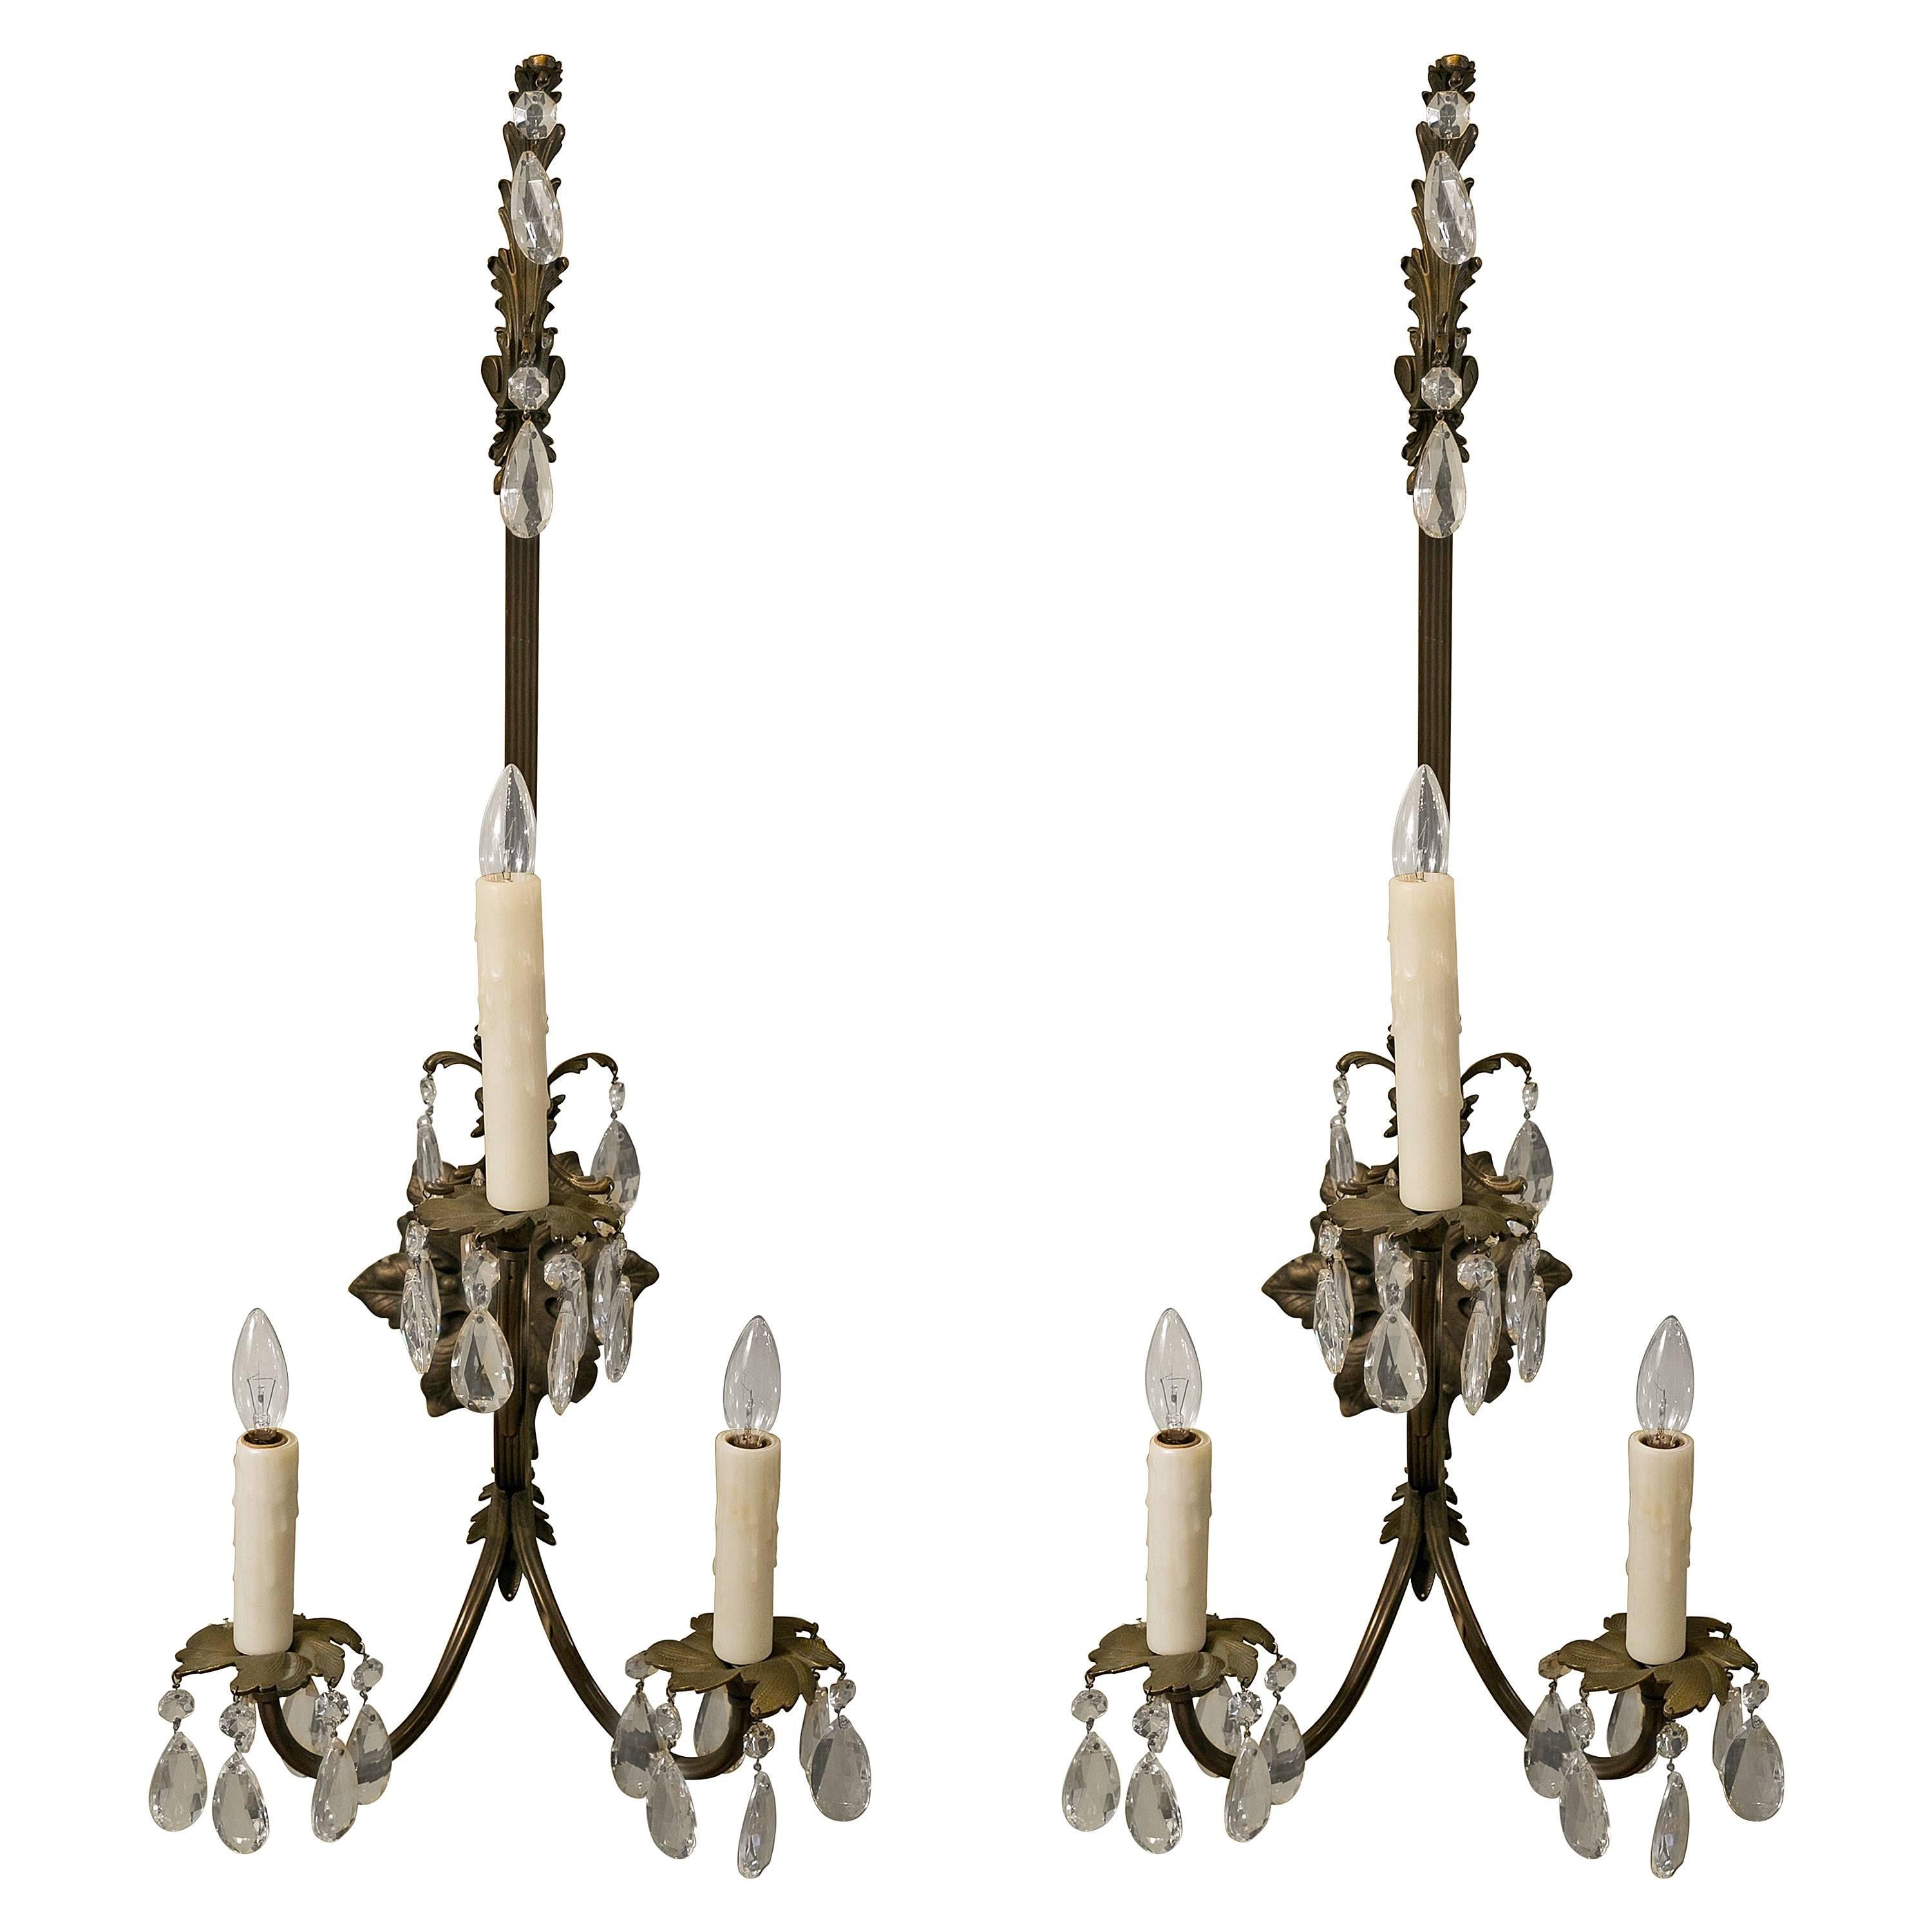 Pair Tall French Louis XV Revival Bronze Sconces with Crystals, circa 1880